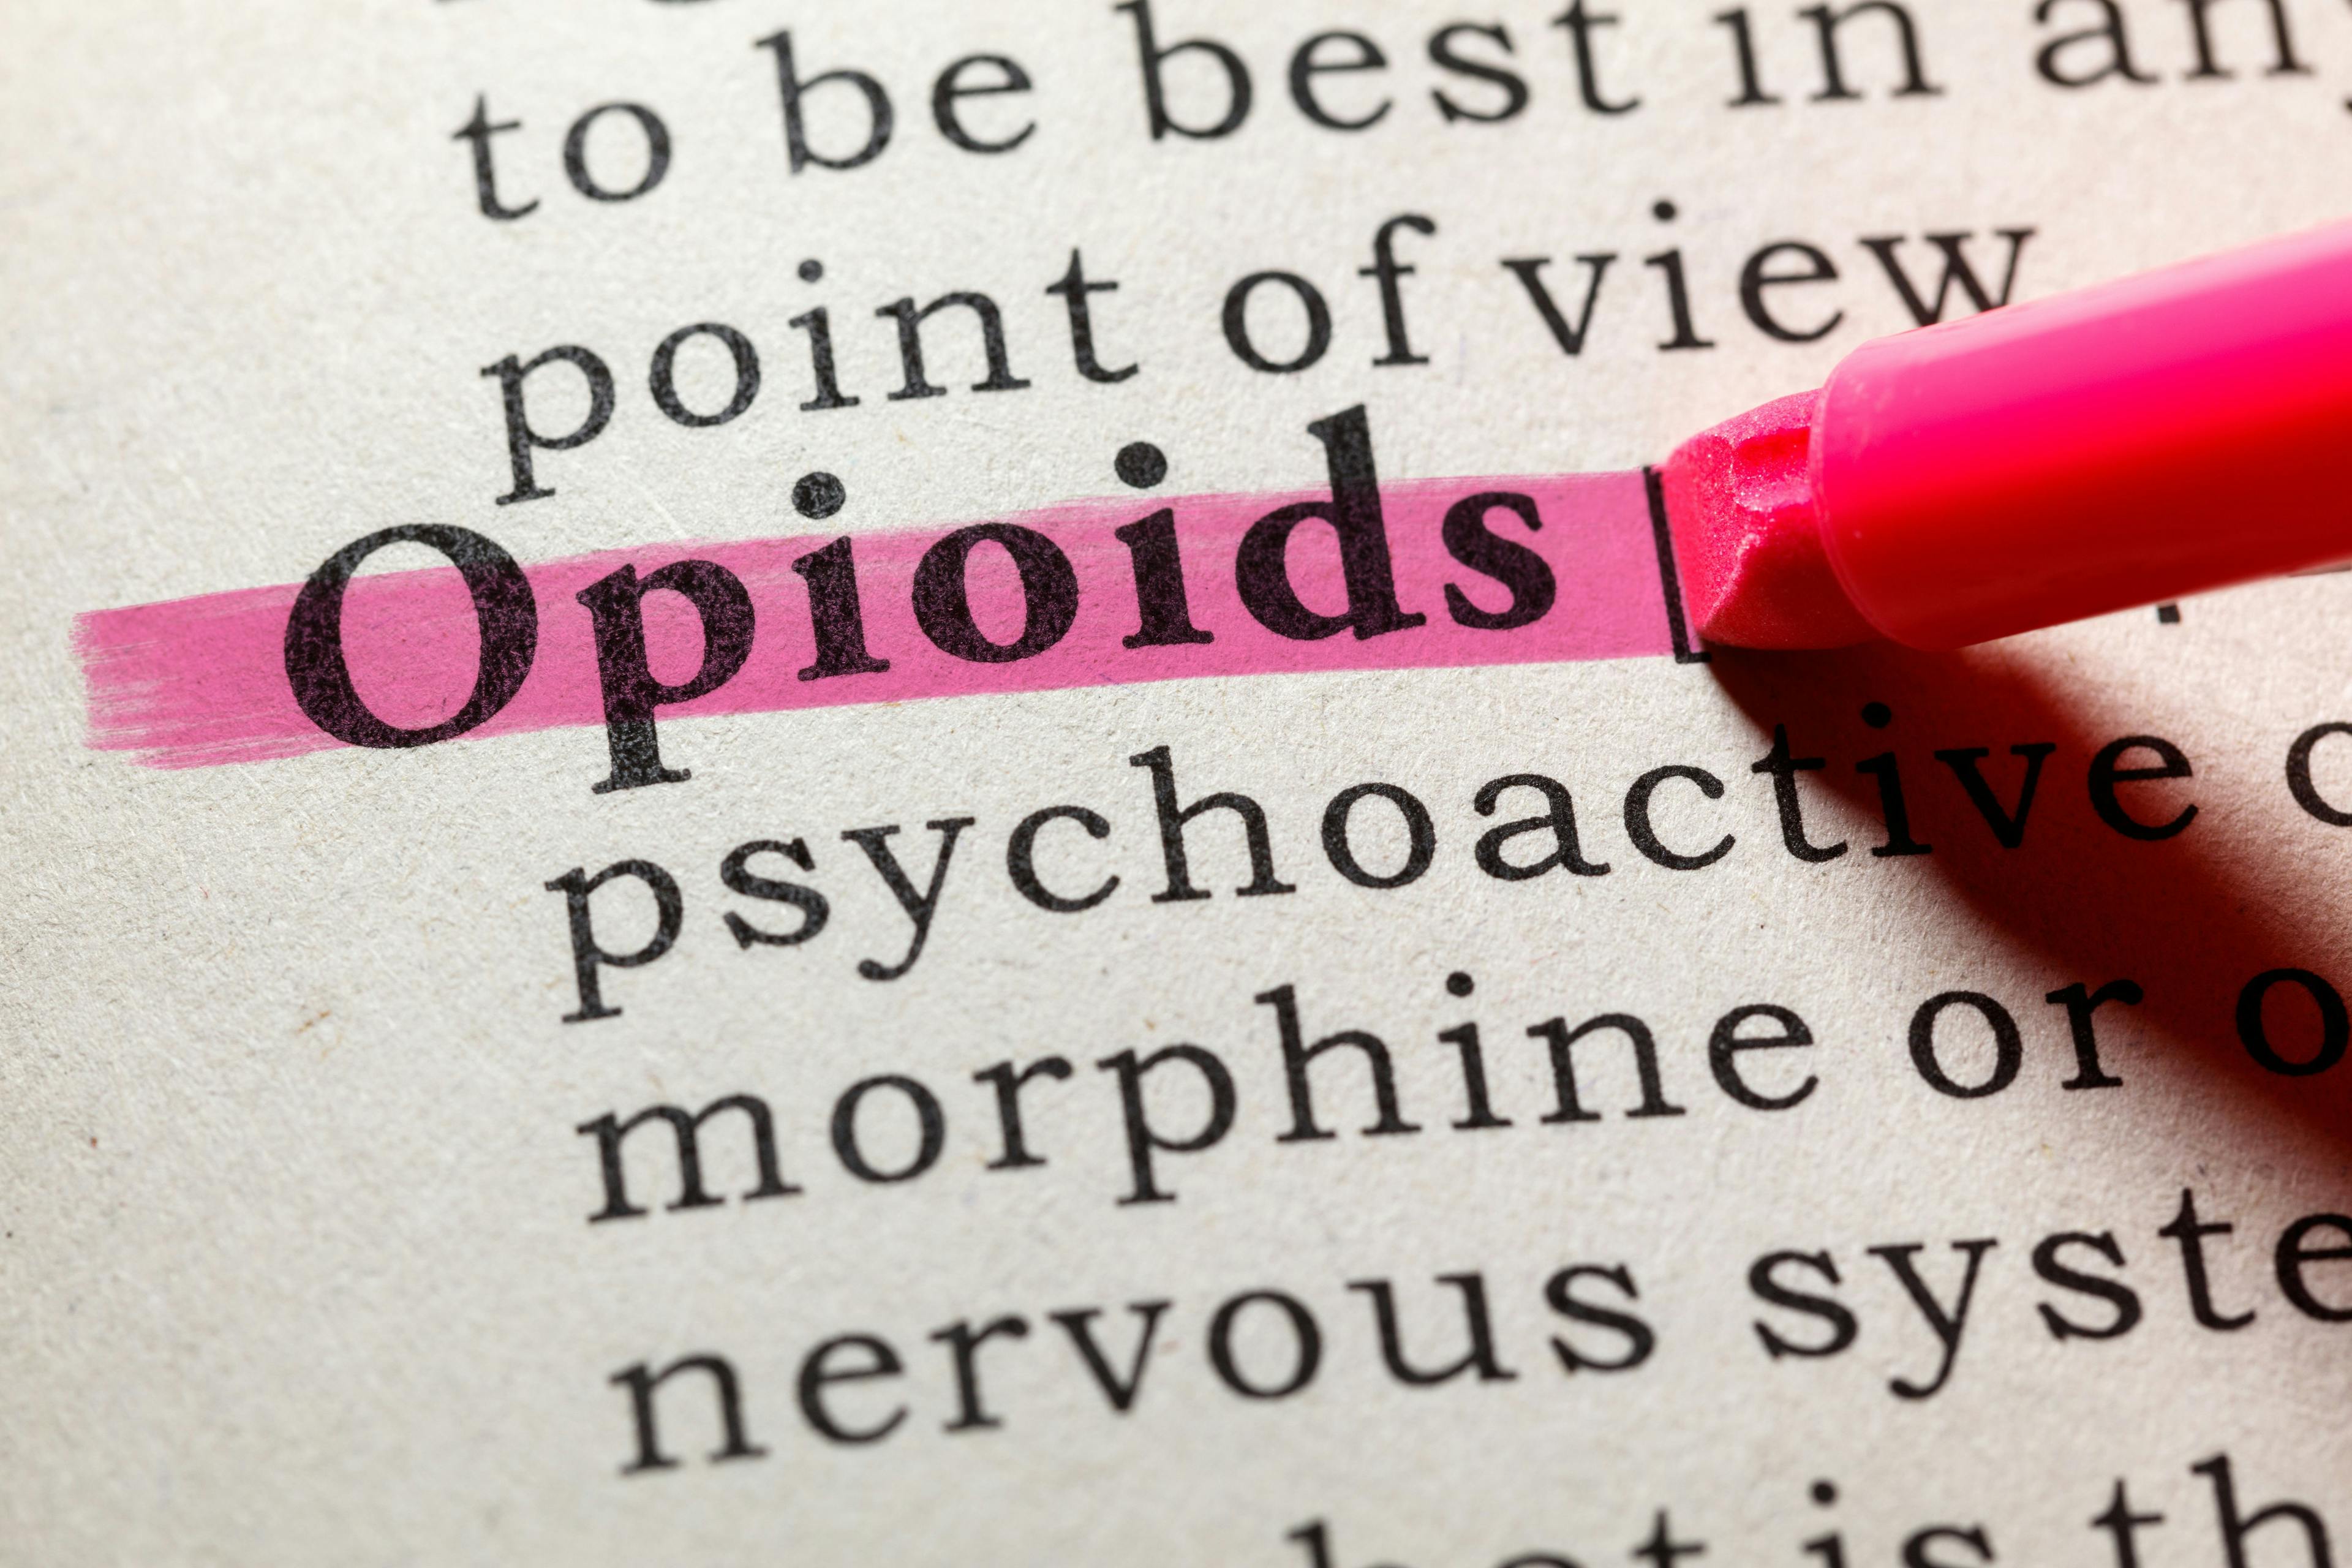 AMA urges revision to opioids guideline